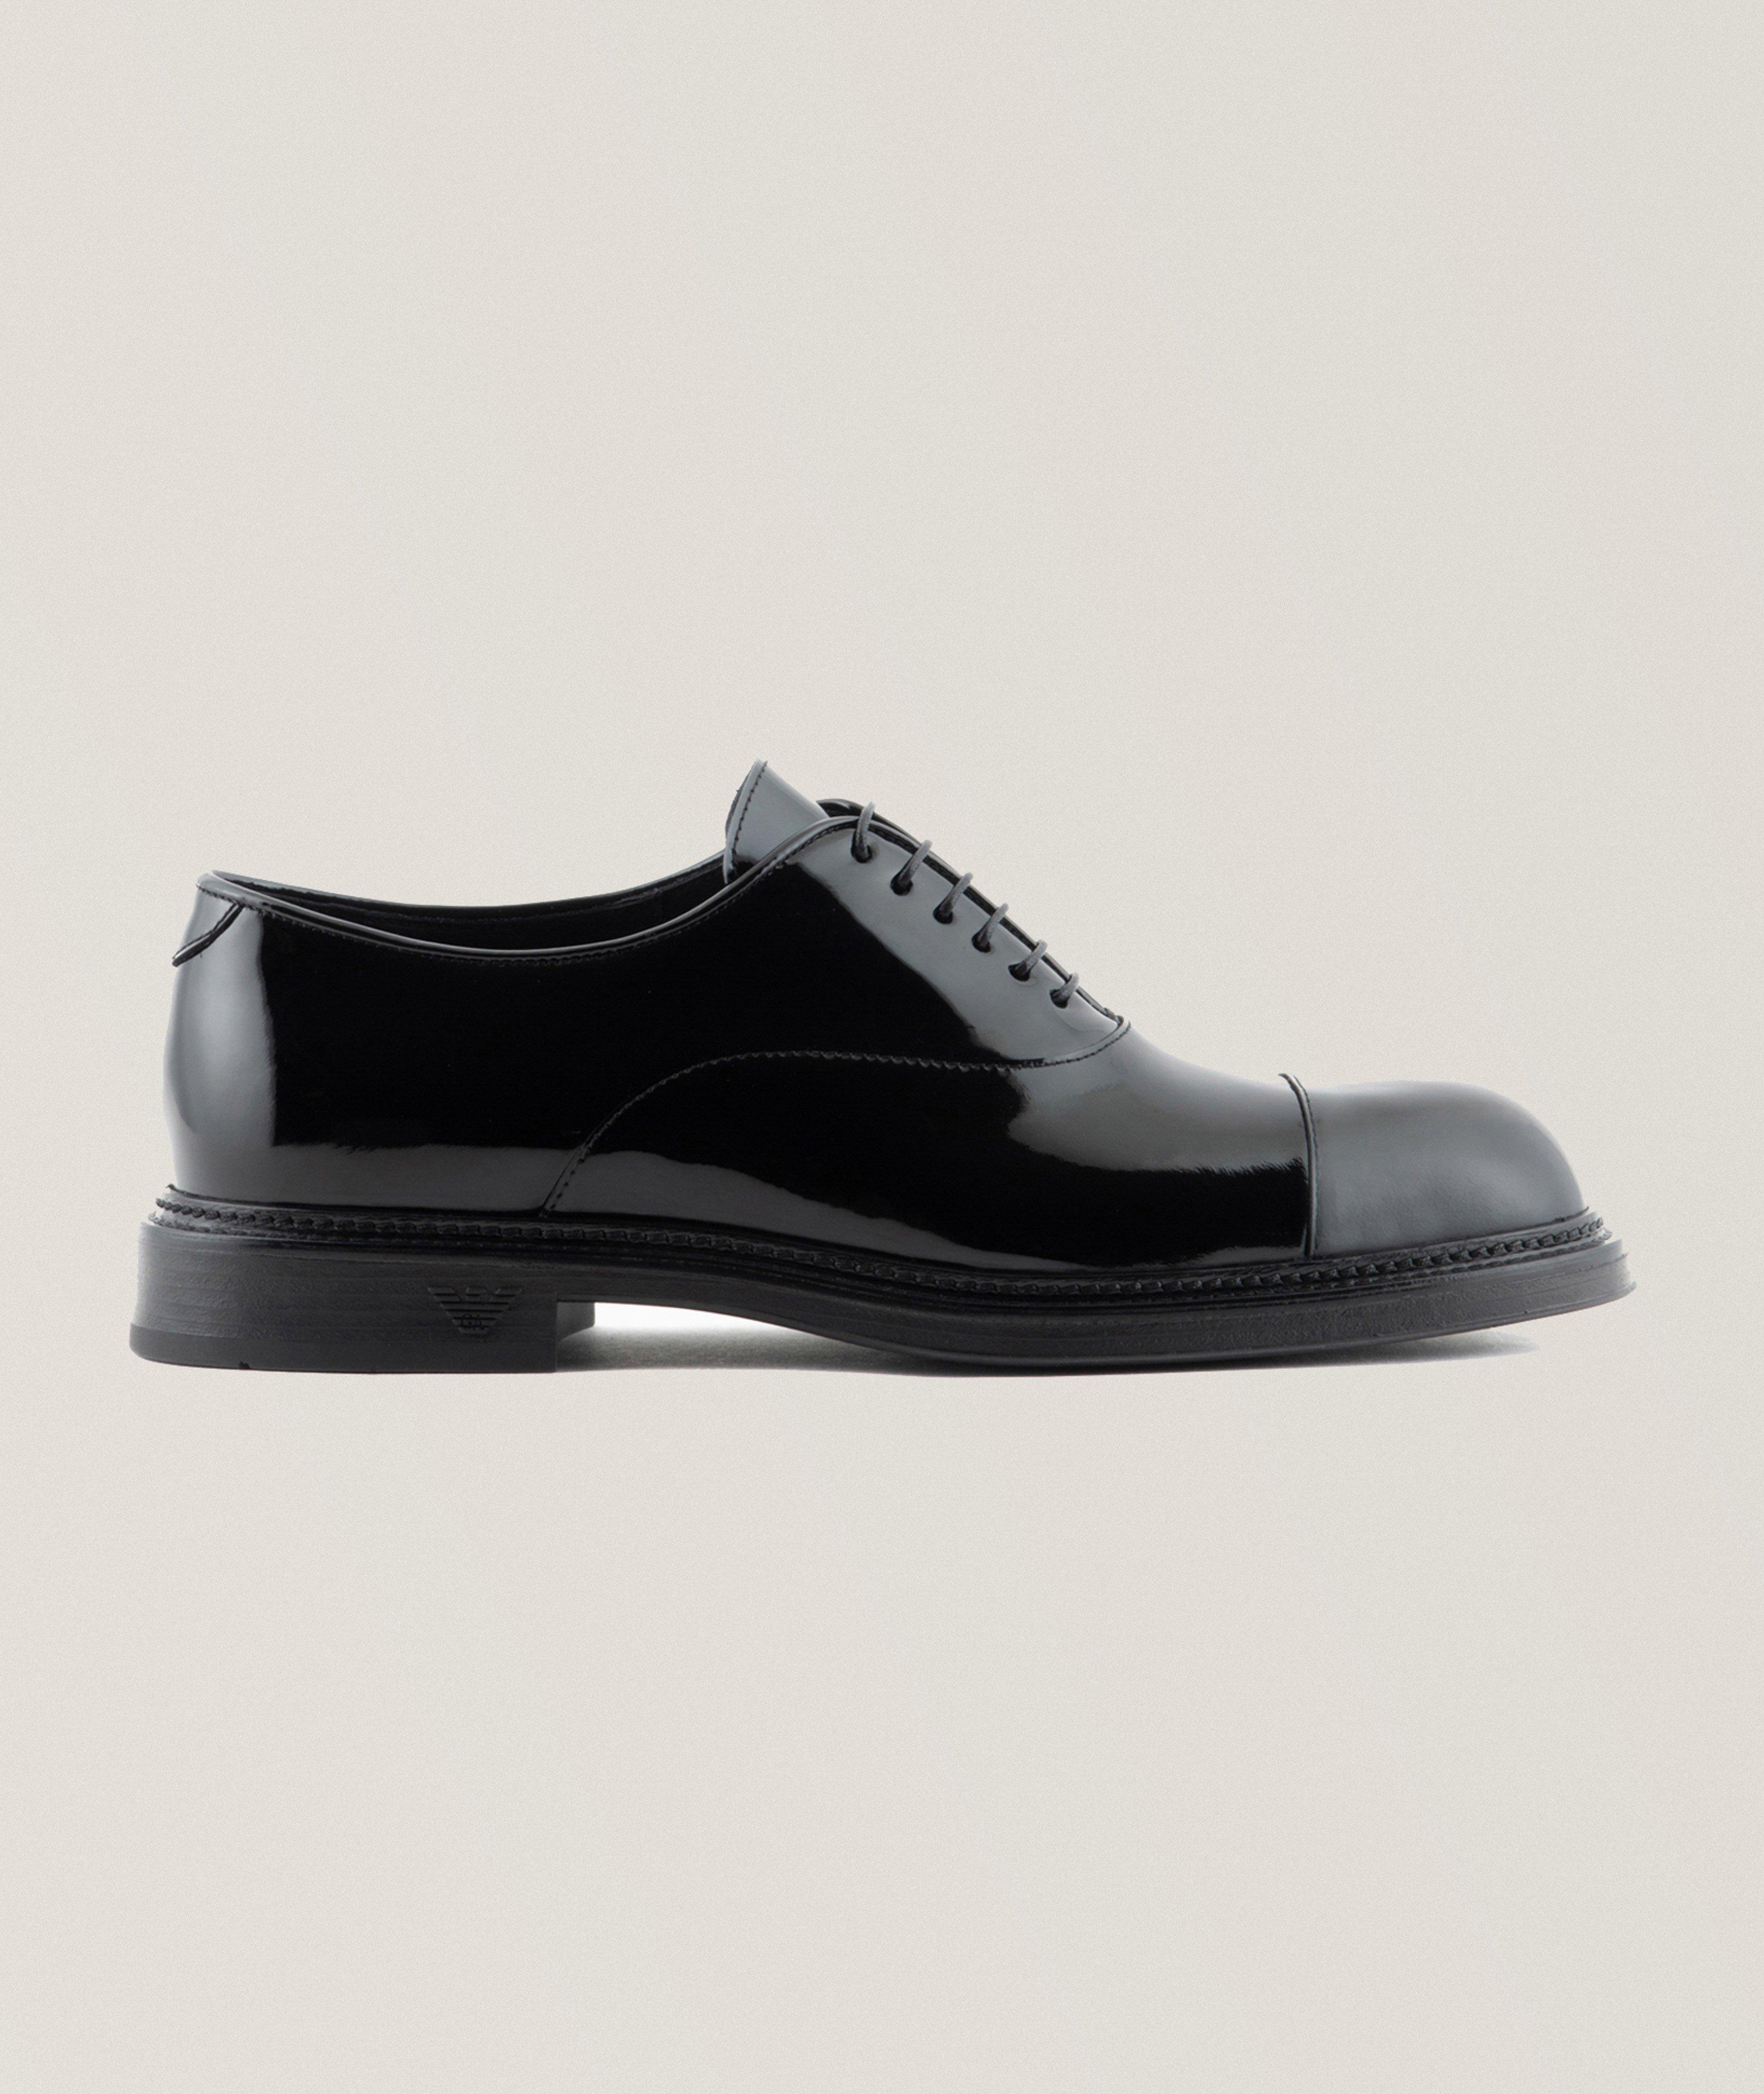 Emporio Armani Patent Leather Oxfords | Dress Shoes | Harry Rosen